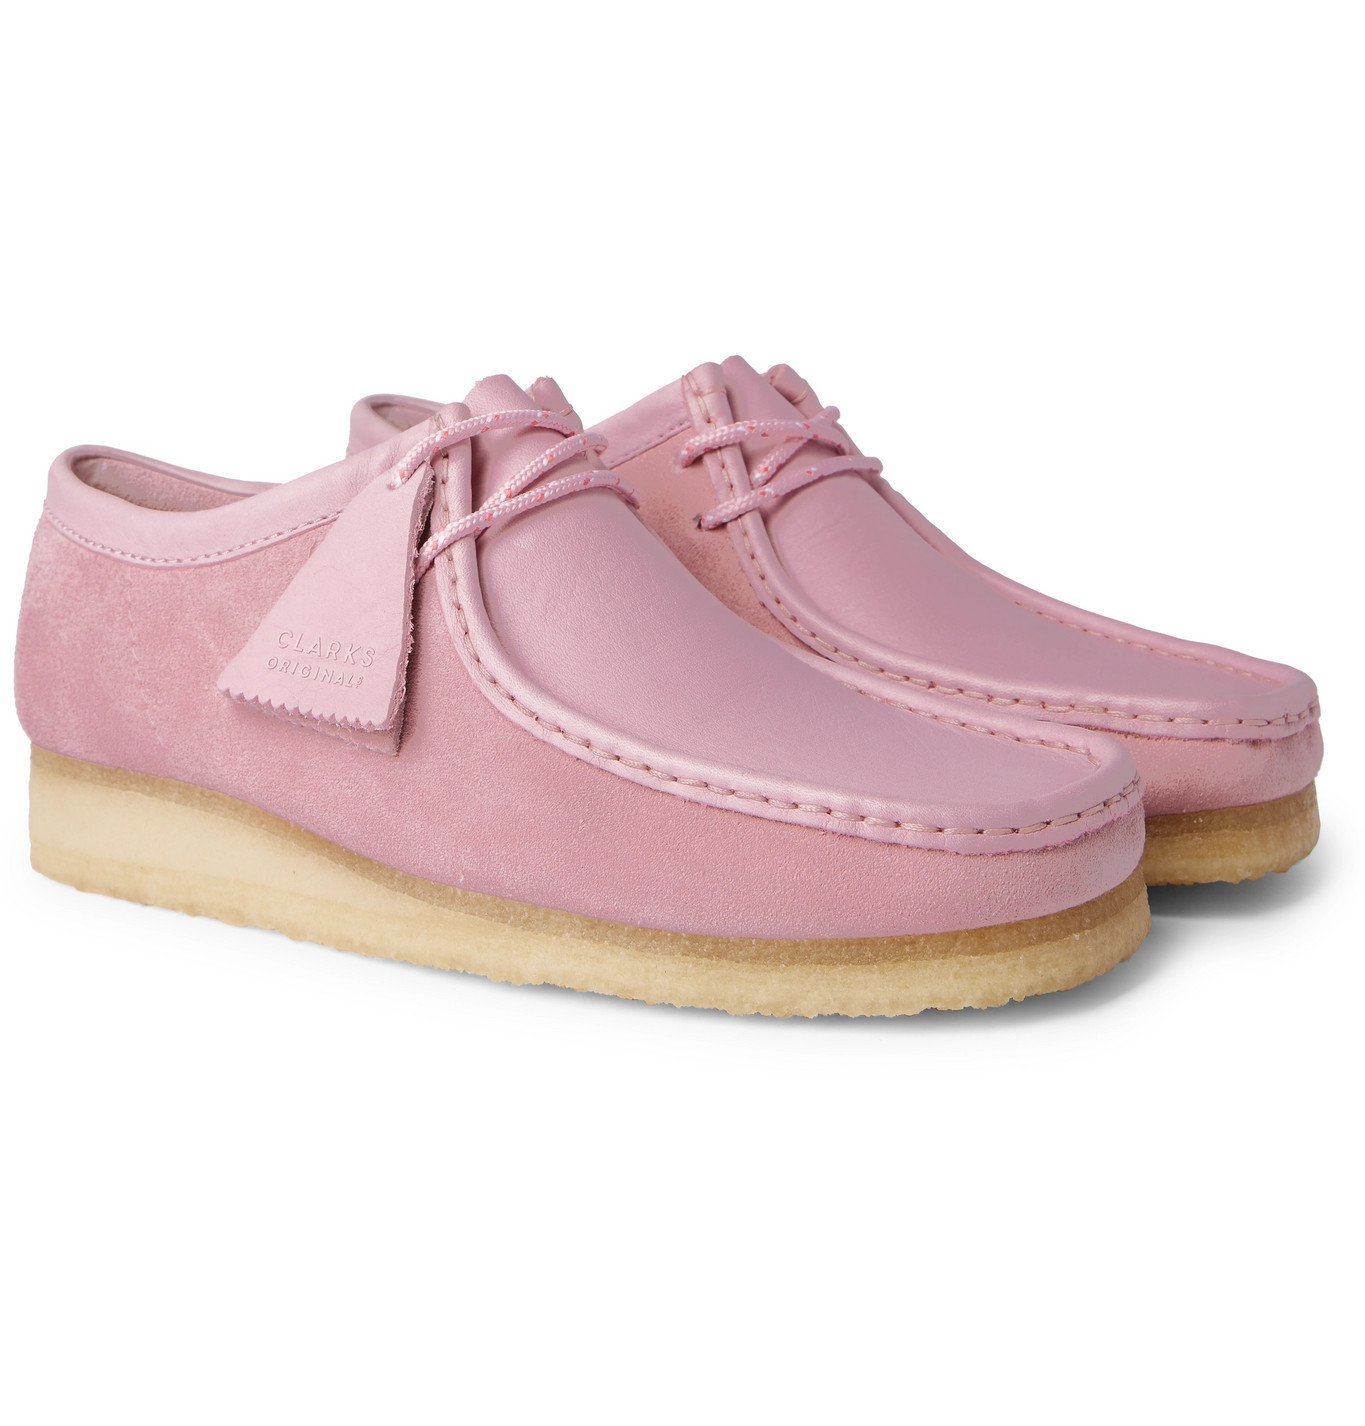 clarks pink boots